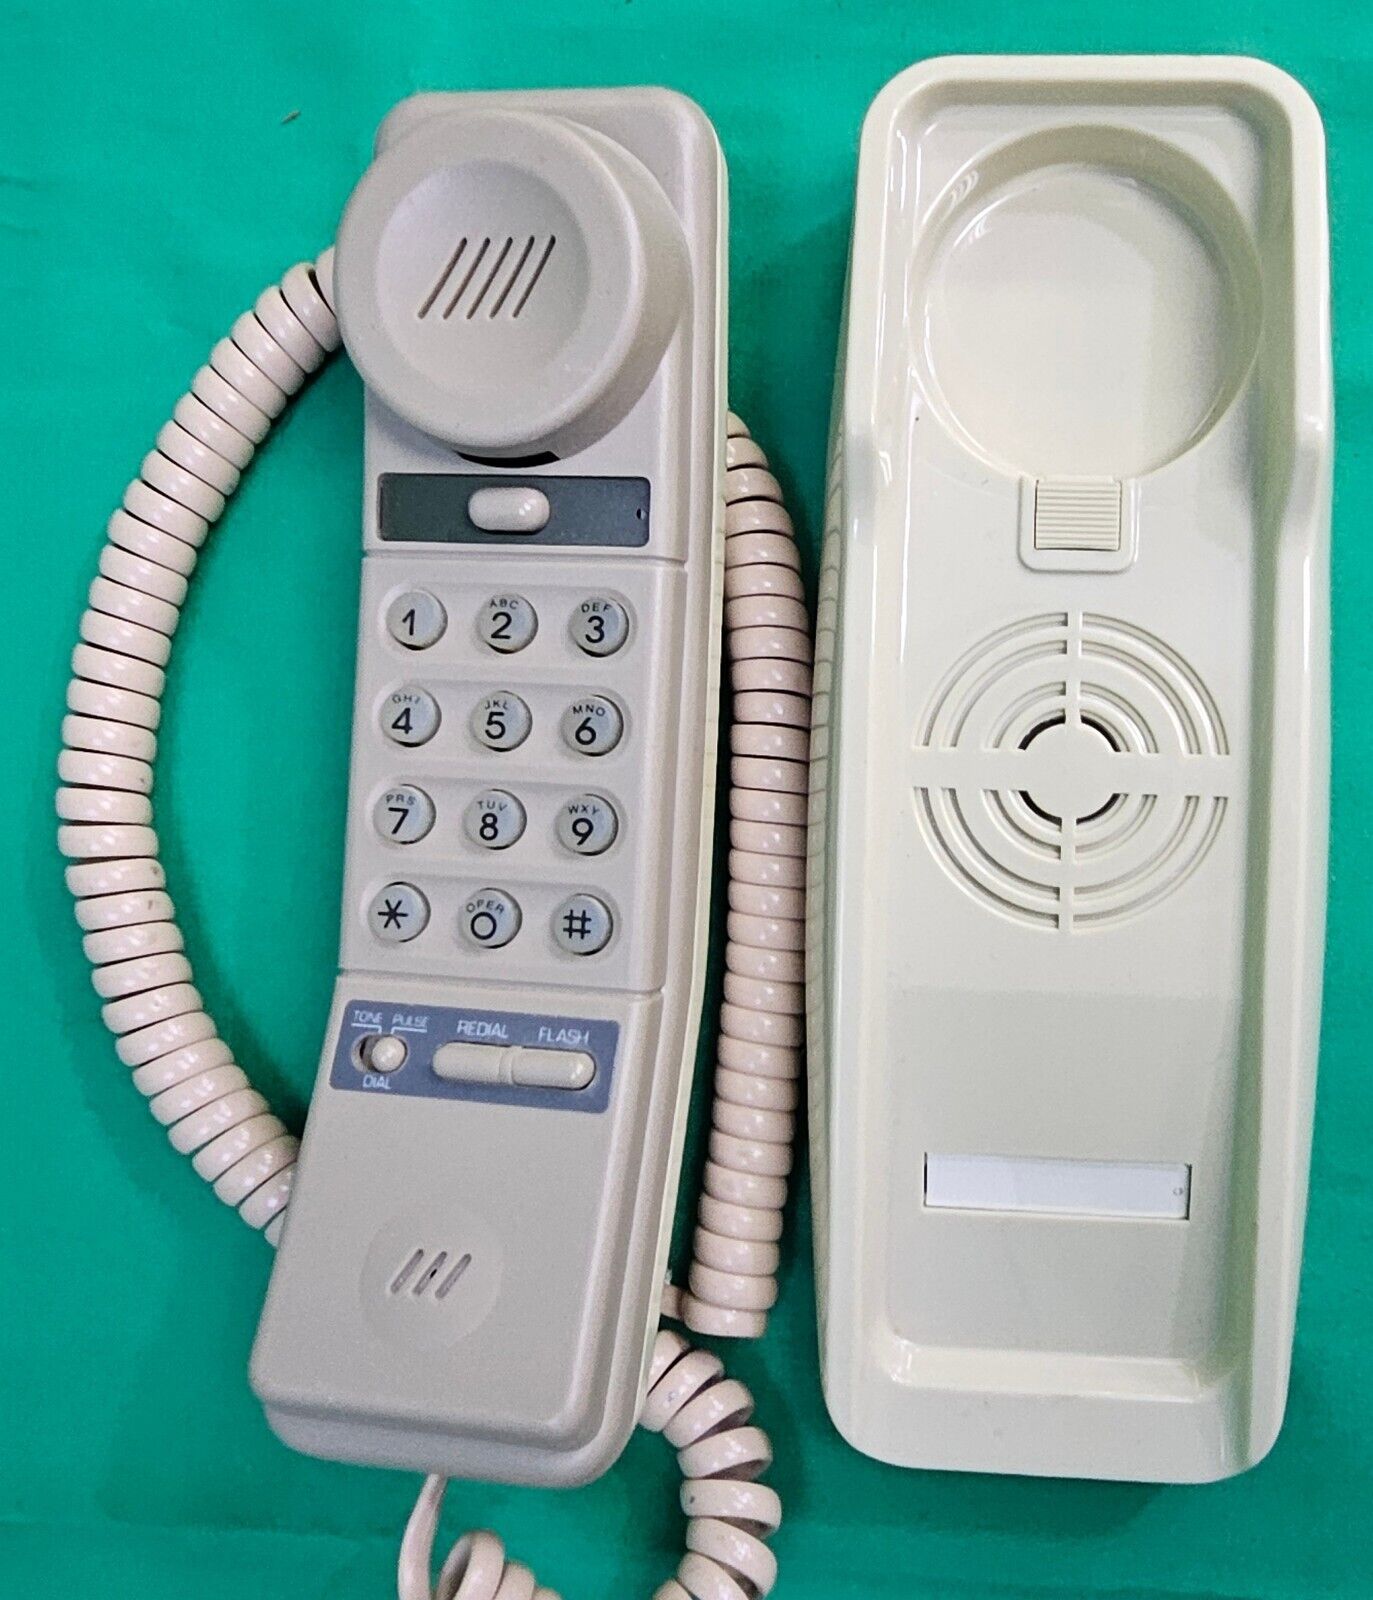 Vintage 1990s Telco Landlone Wall Phone Push Button Pulse Dial Telephone 9431A